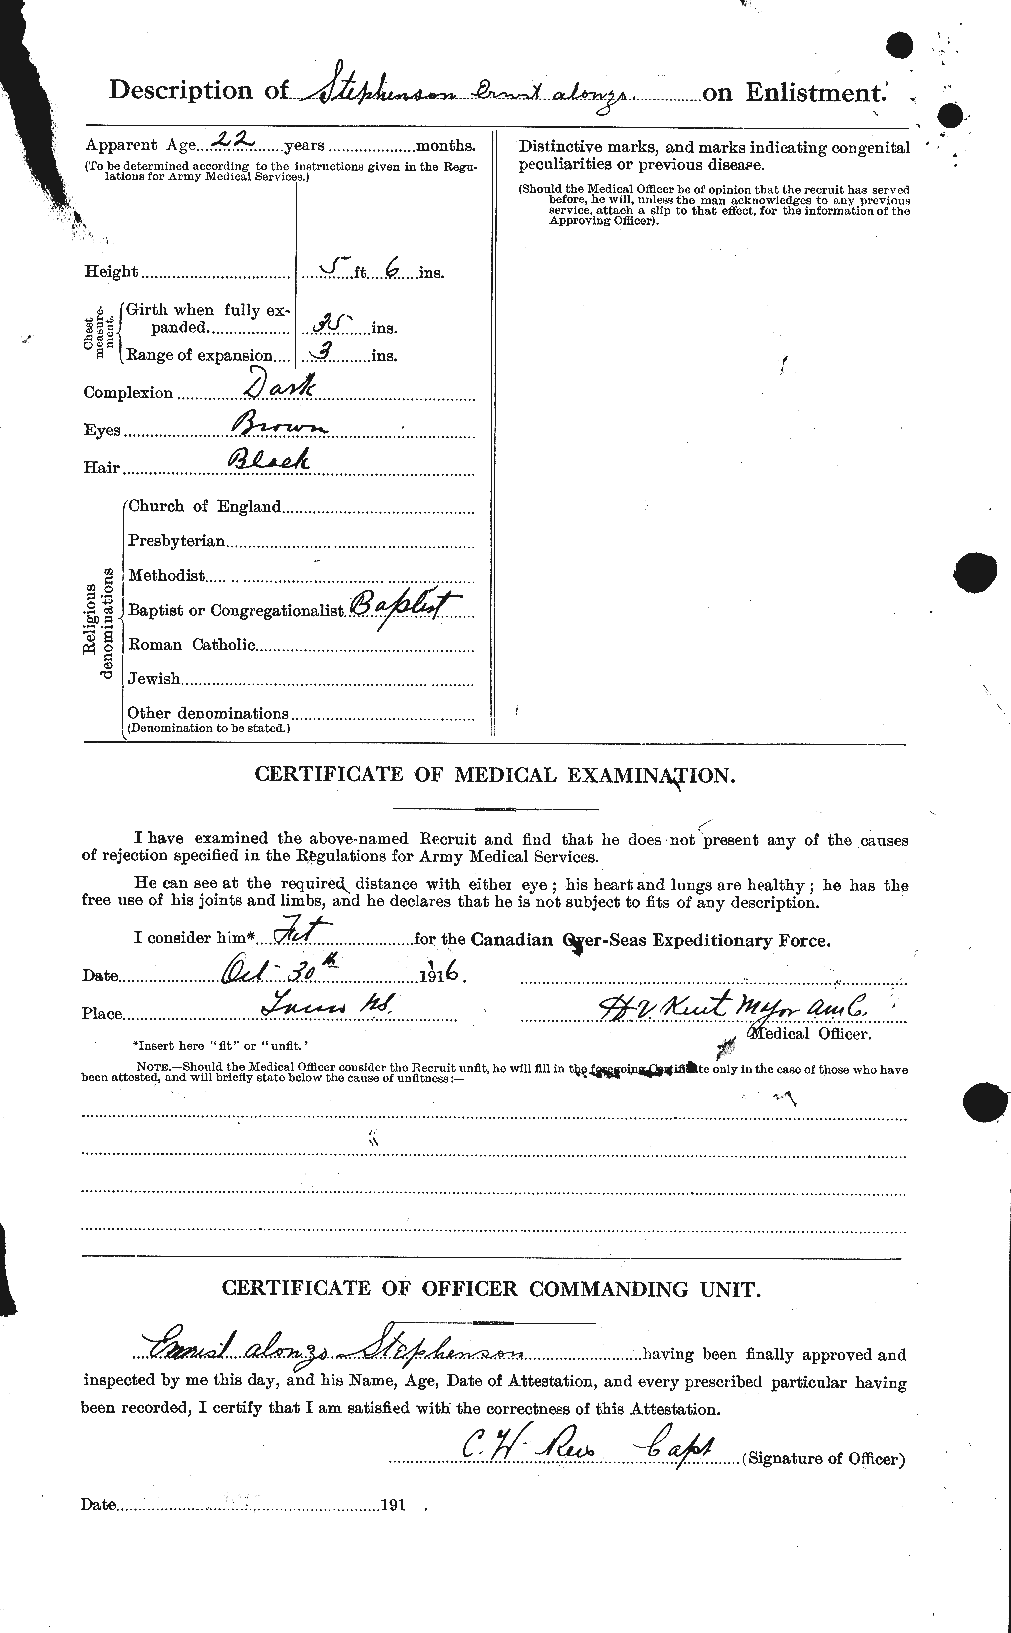 Personnel Records of the First World War - CEF 119129b